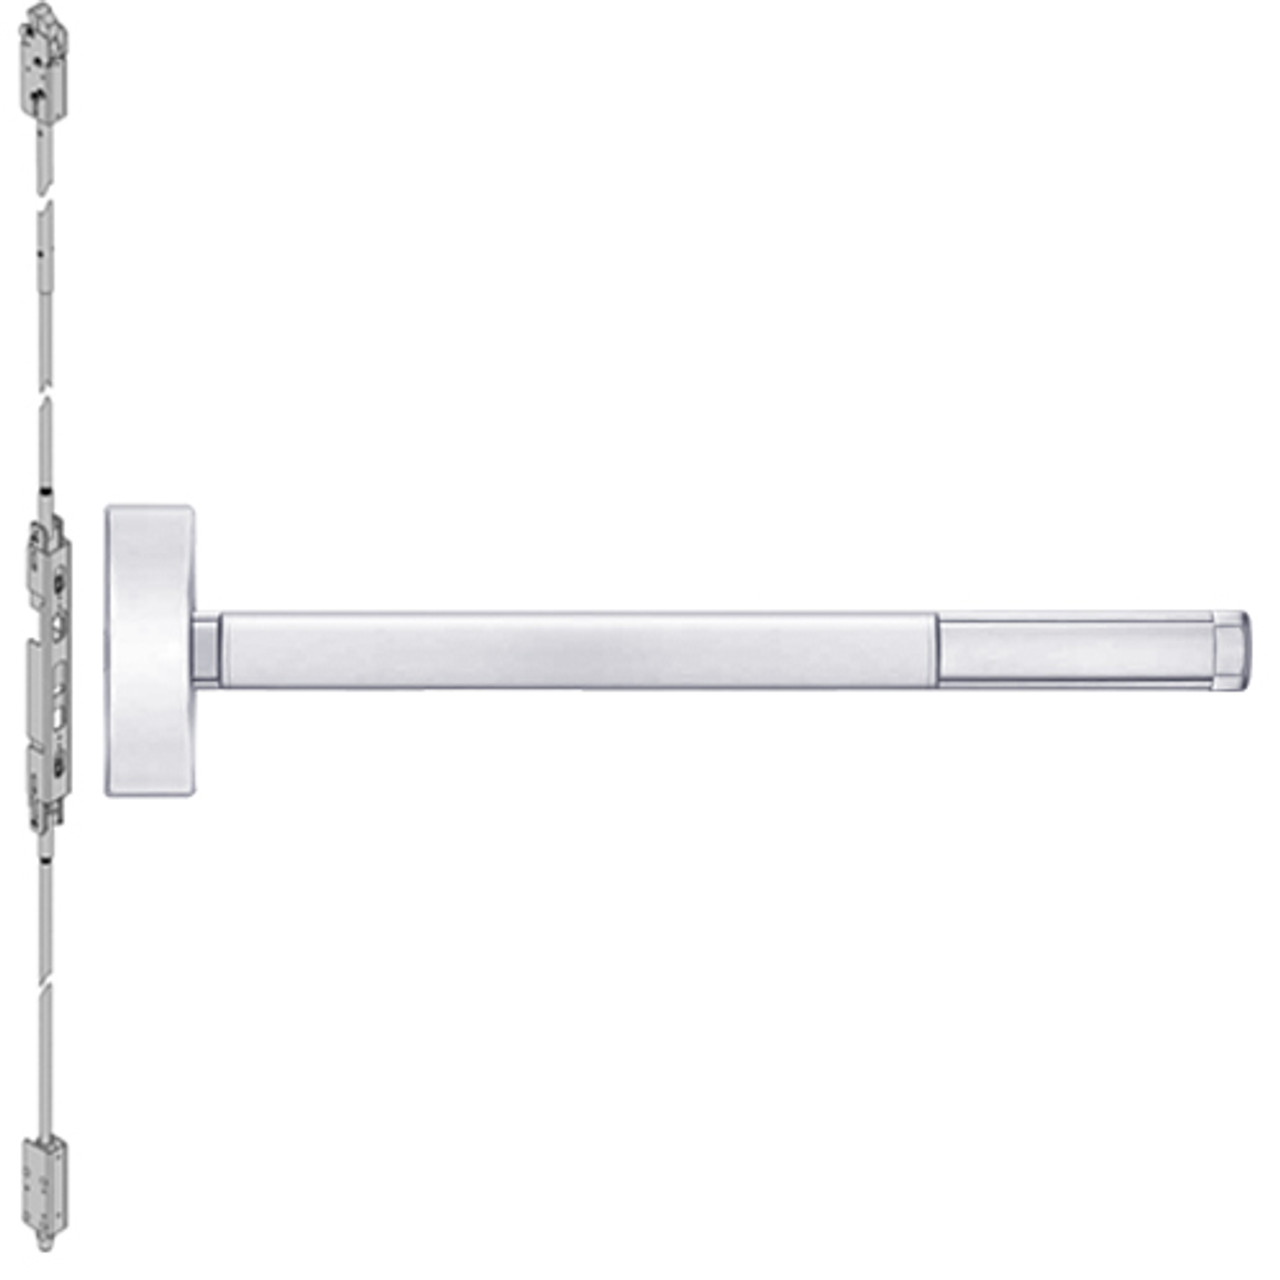 MLRFL2803-625-36 PHI 2800 Series Fire Rated Concealed Vertical Rod Exit Device with Motorized Latch Retraction Prepped for Key Retracts Latchbolt in Bright Chrome Finish